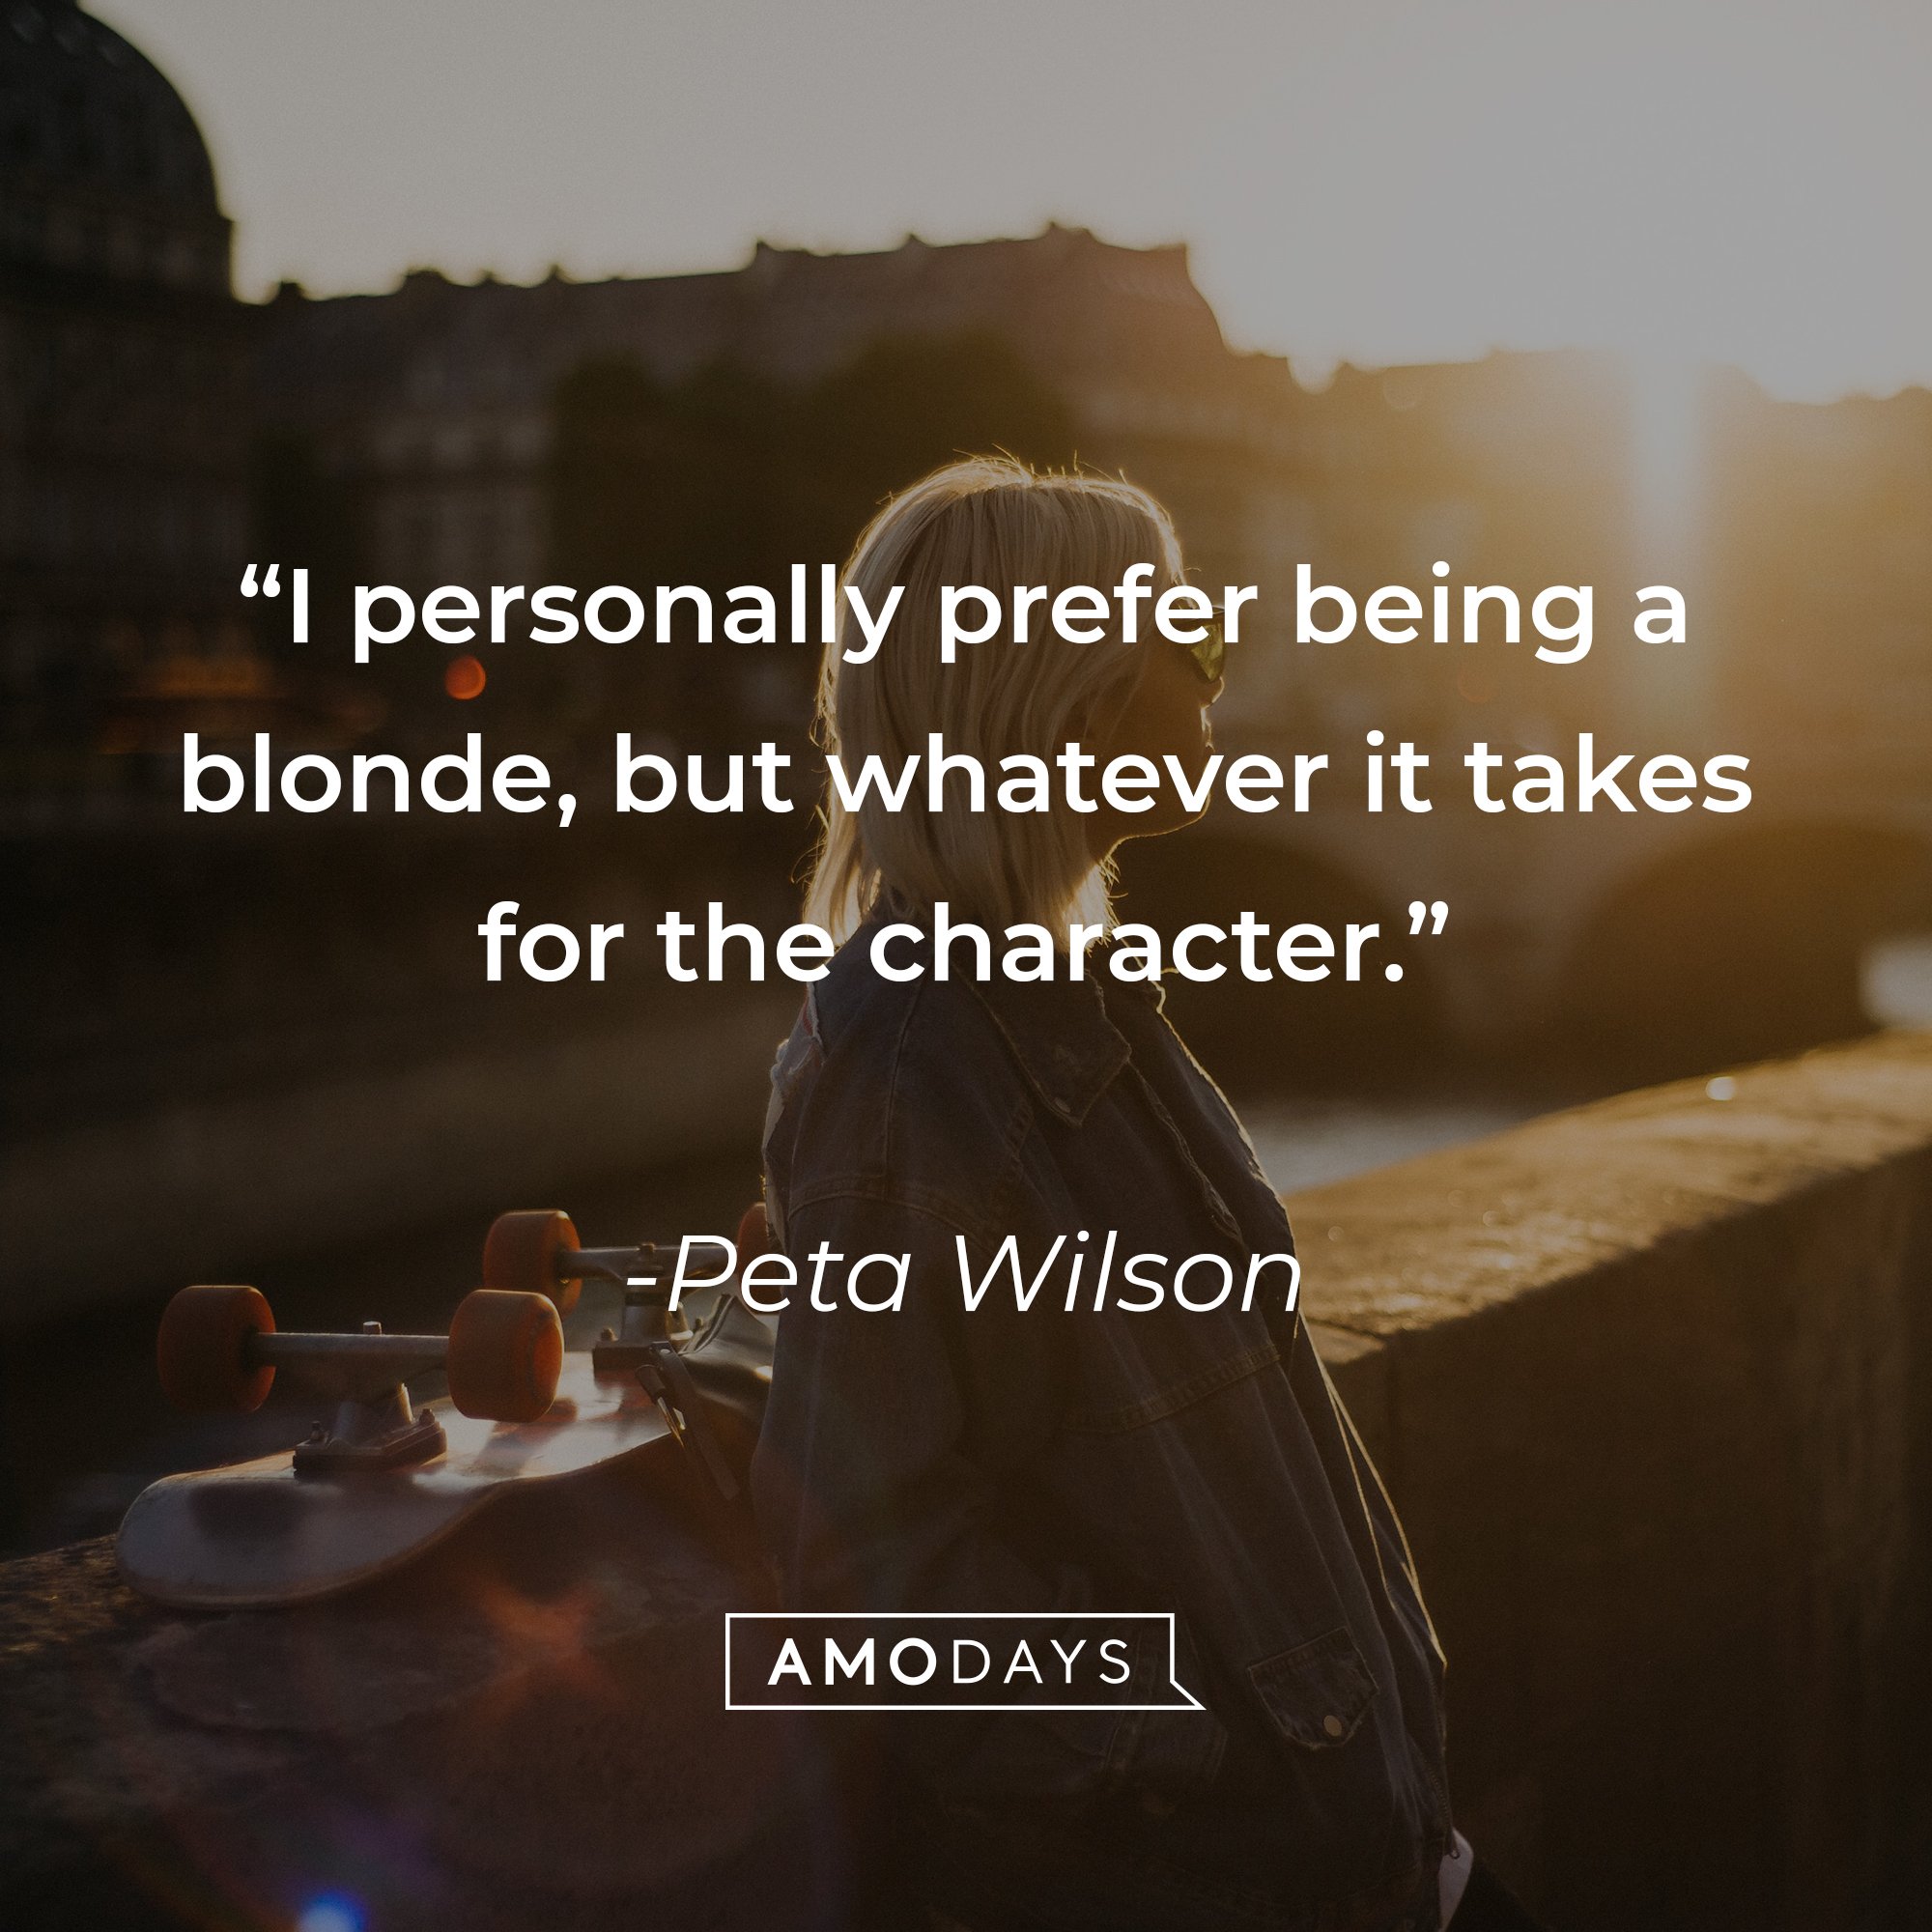  Peta Wilson’s quote: "I personally prefer being a blonde, but whatever it takes for the character." | Image: AmoDays